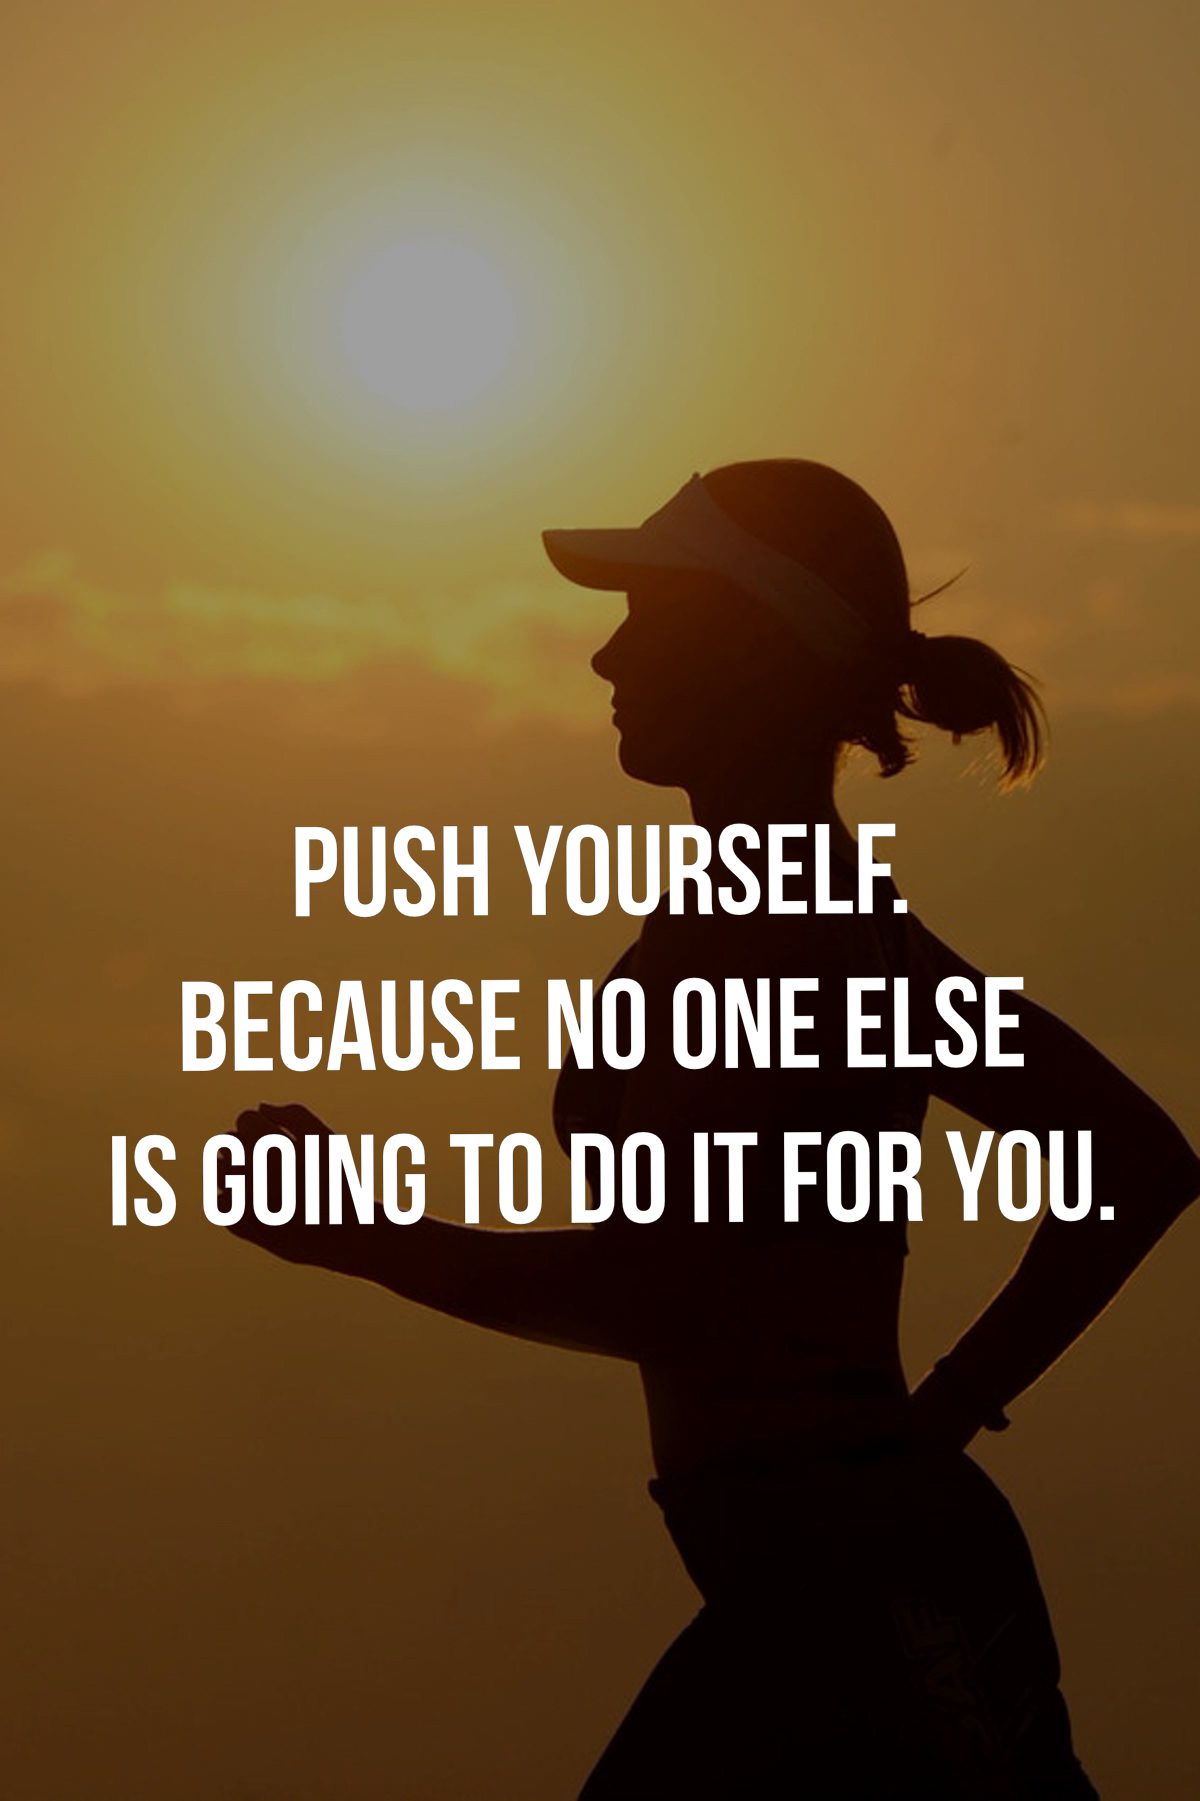 Push yourself. Because no one else is going to do it for you.